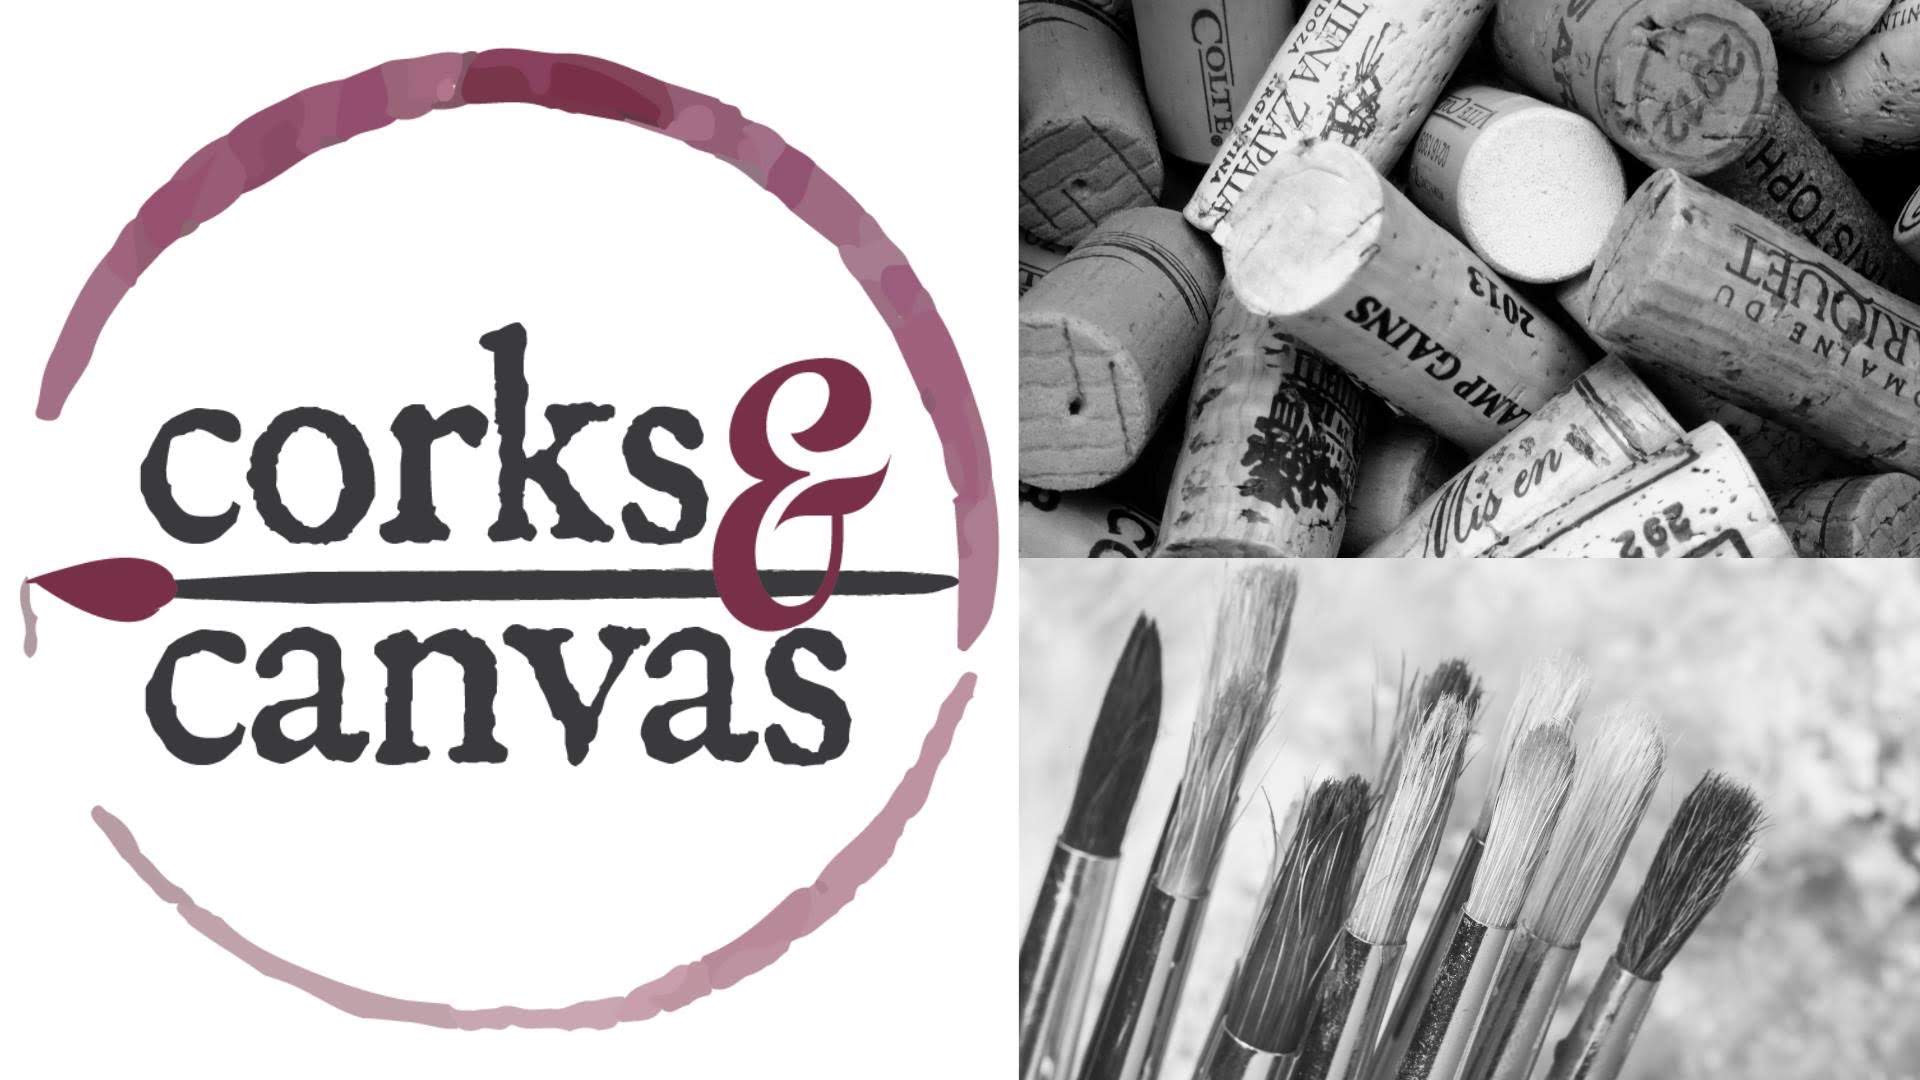 Corks and Canvas 2019